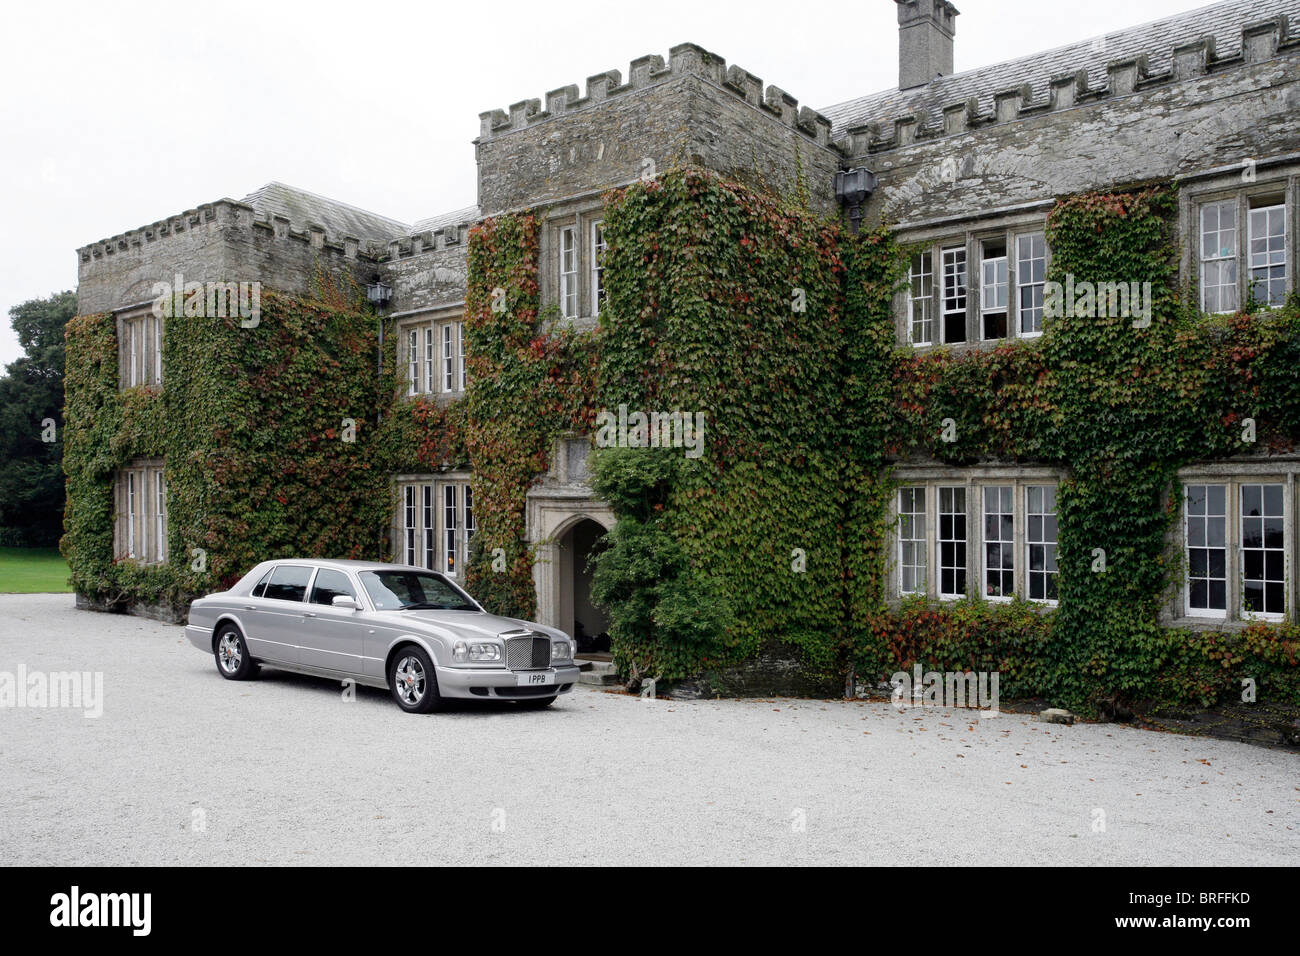 Prideaux Place Manor, Padstow, Cornwall, South England, Great Britain, Europe Stock Photo